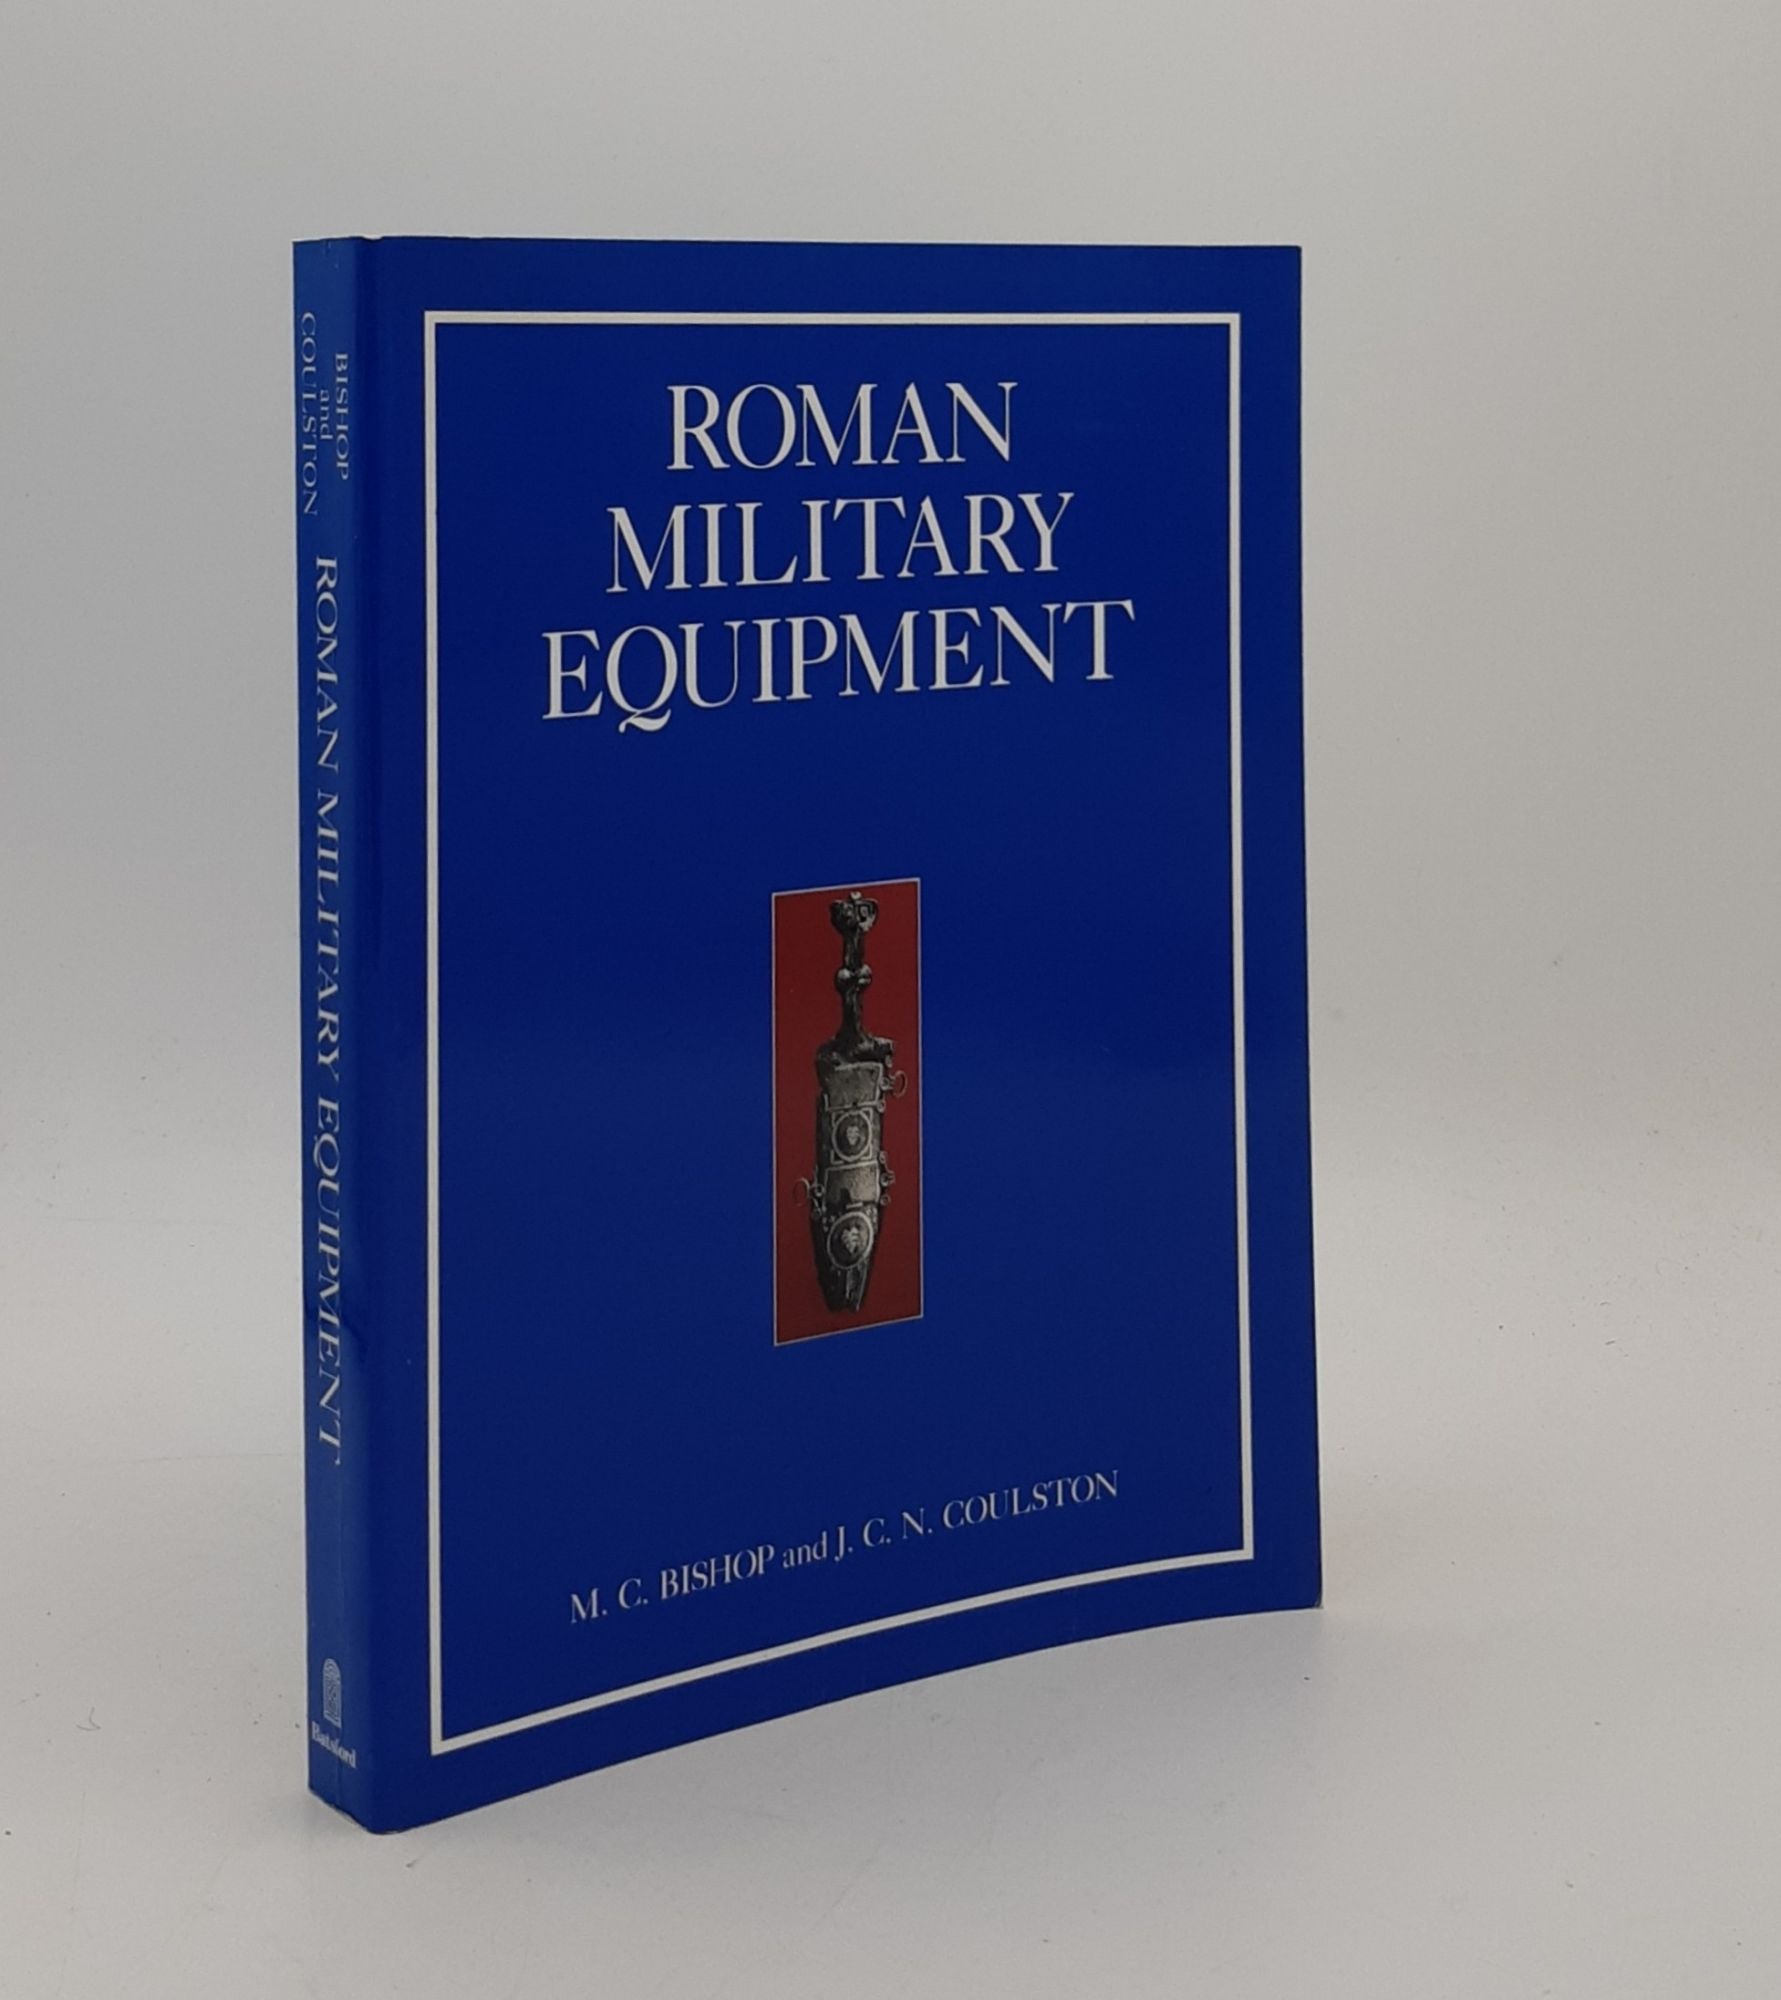 BISHOP M.C., COULSTON J.C.N. - Roman Military Equipment from the Punic Wars to the Fall of Rome